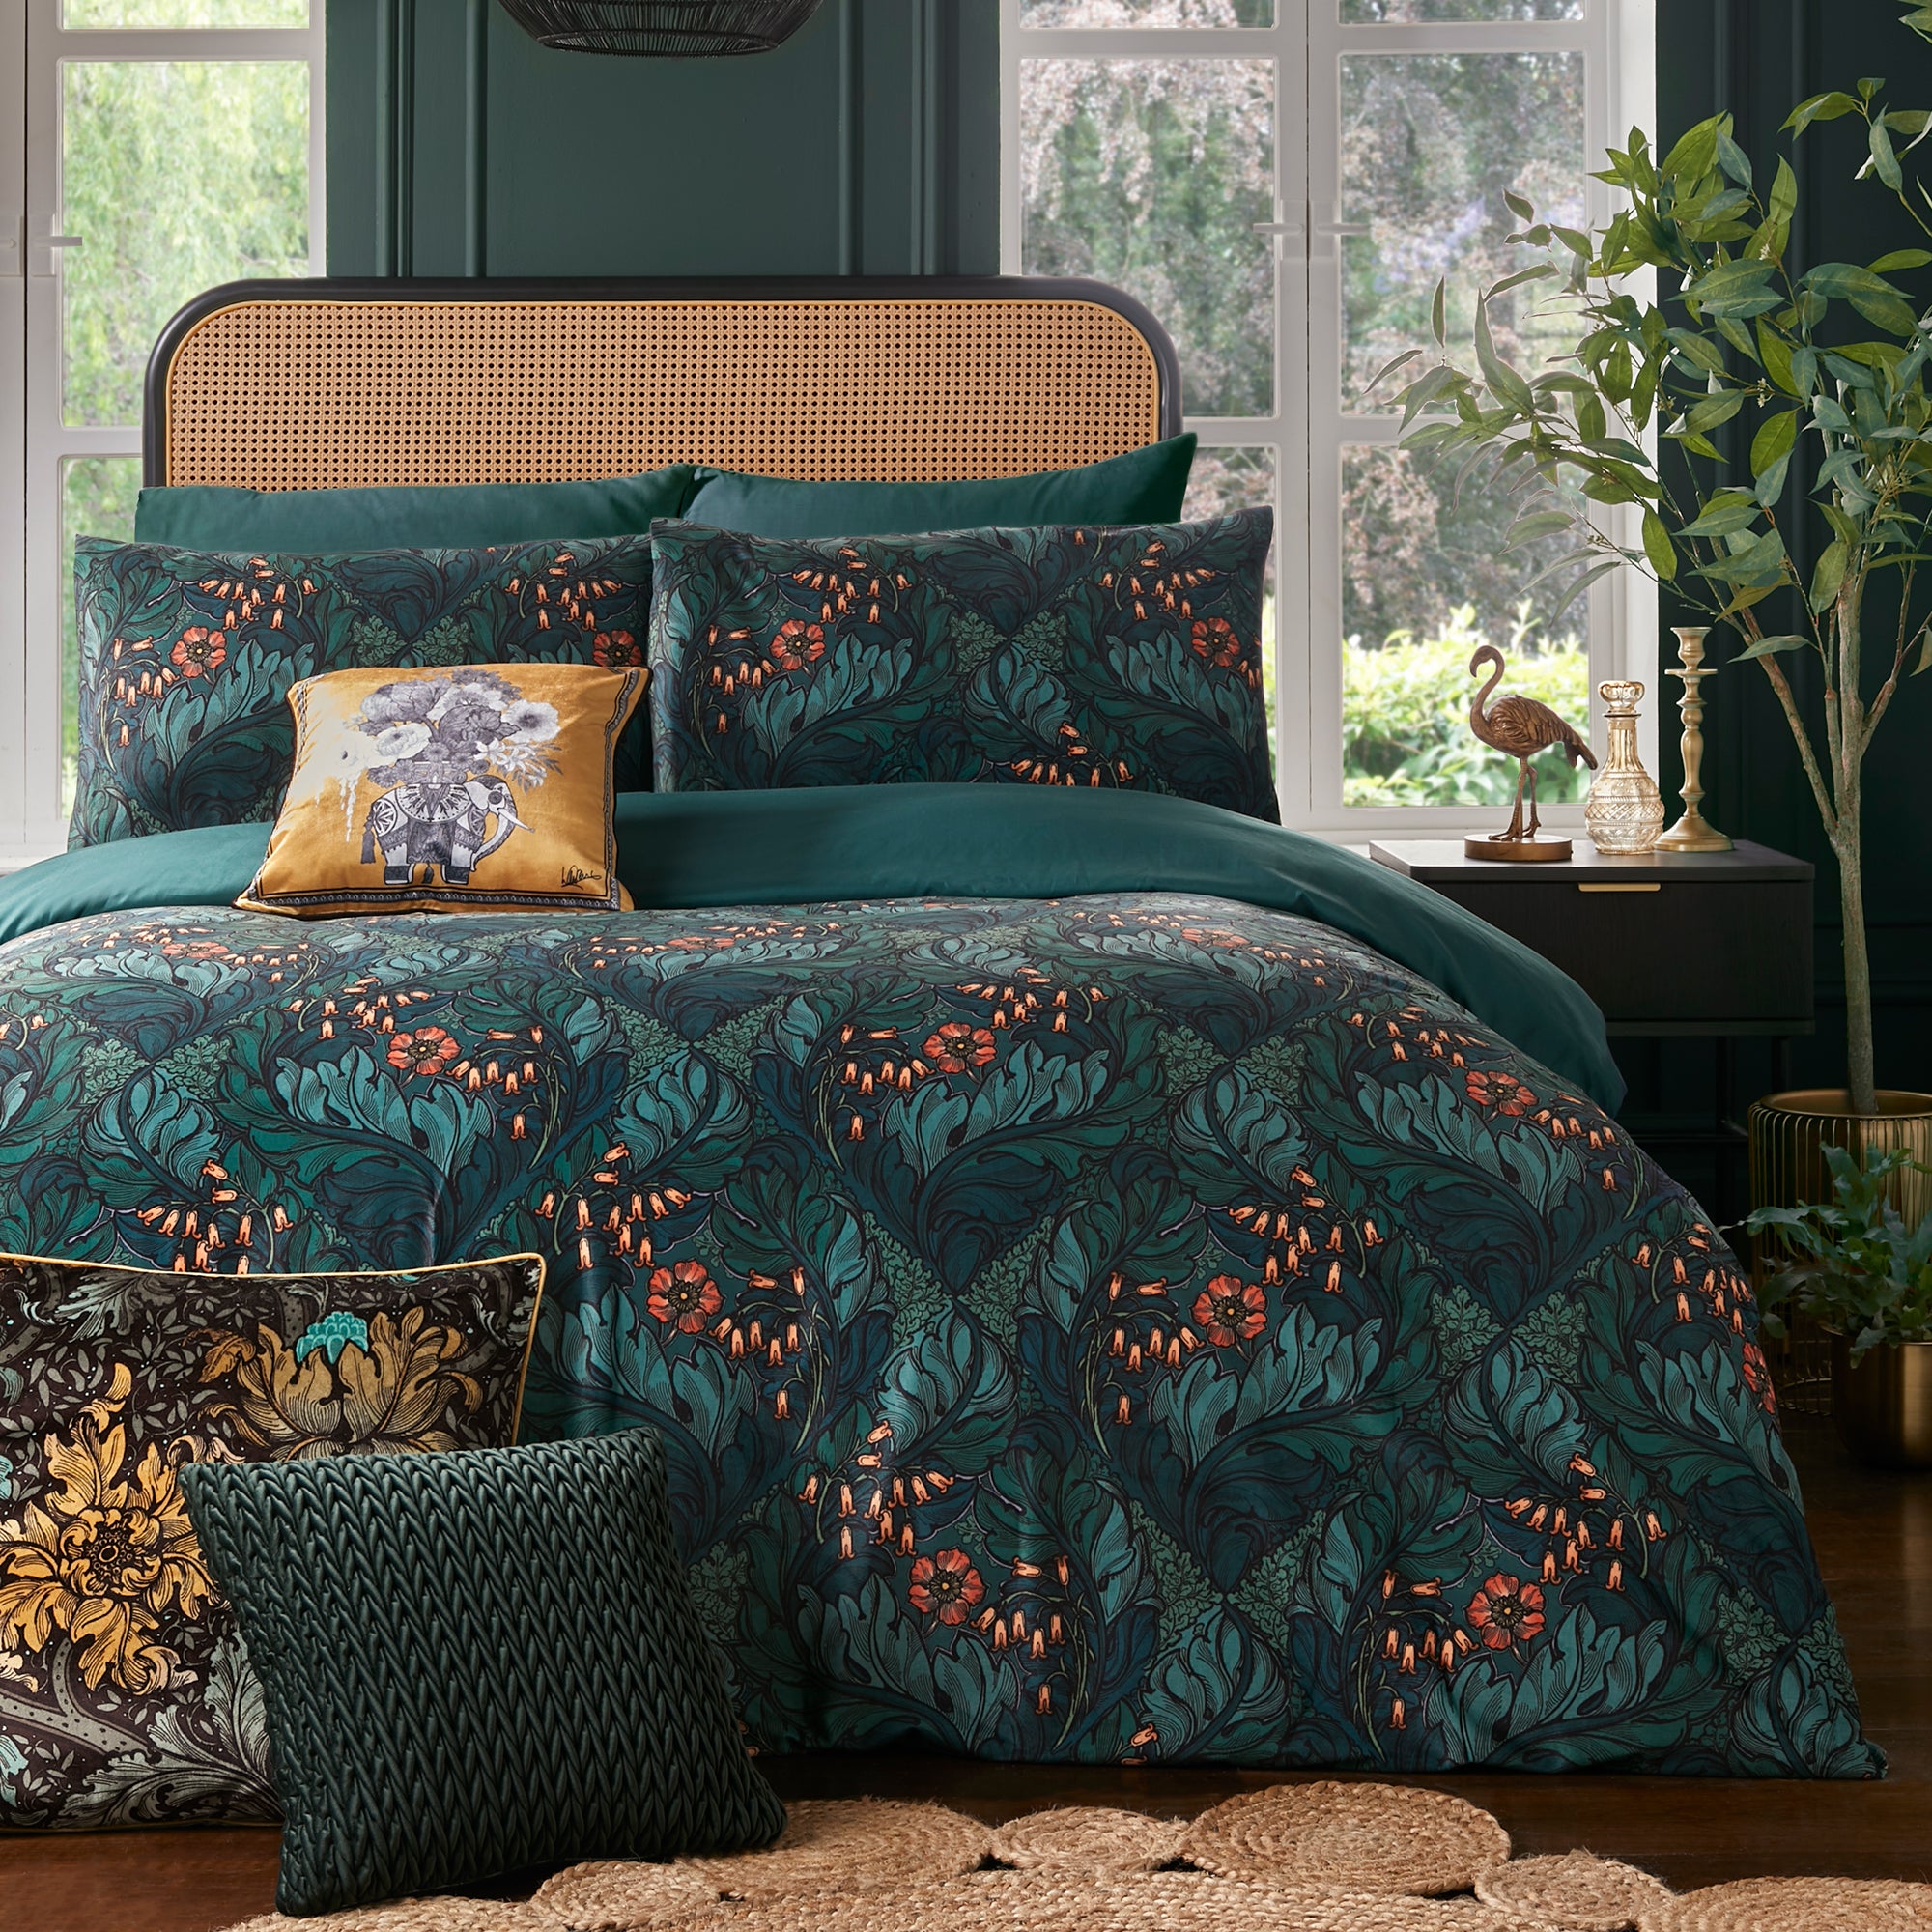 Duvet Cover Set Rambleicious by Laurence Llewelyn-Bowen in Bottle Green